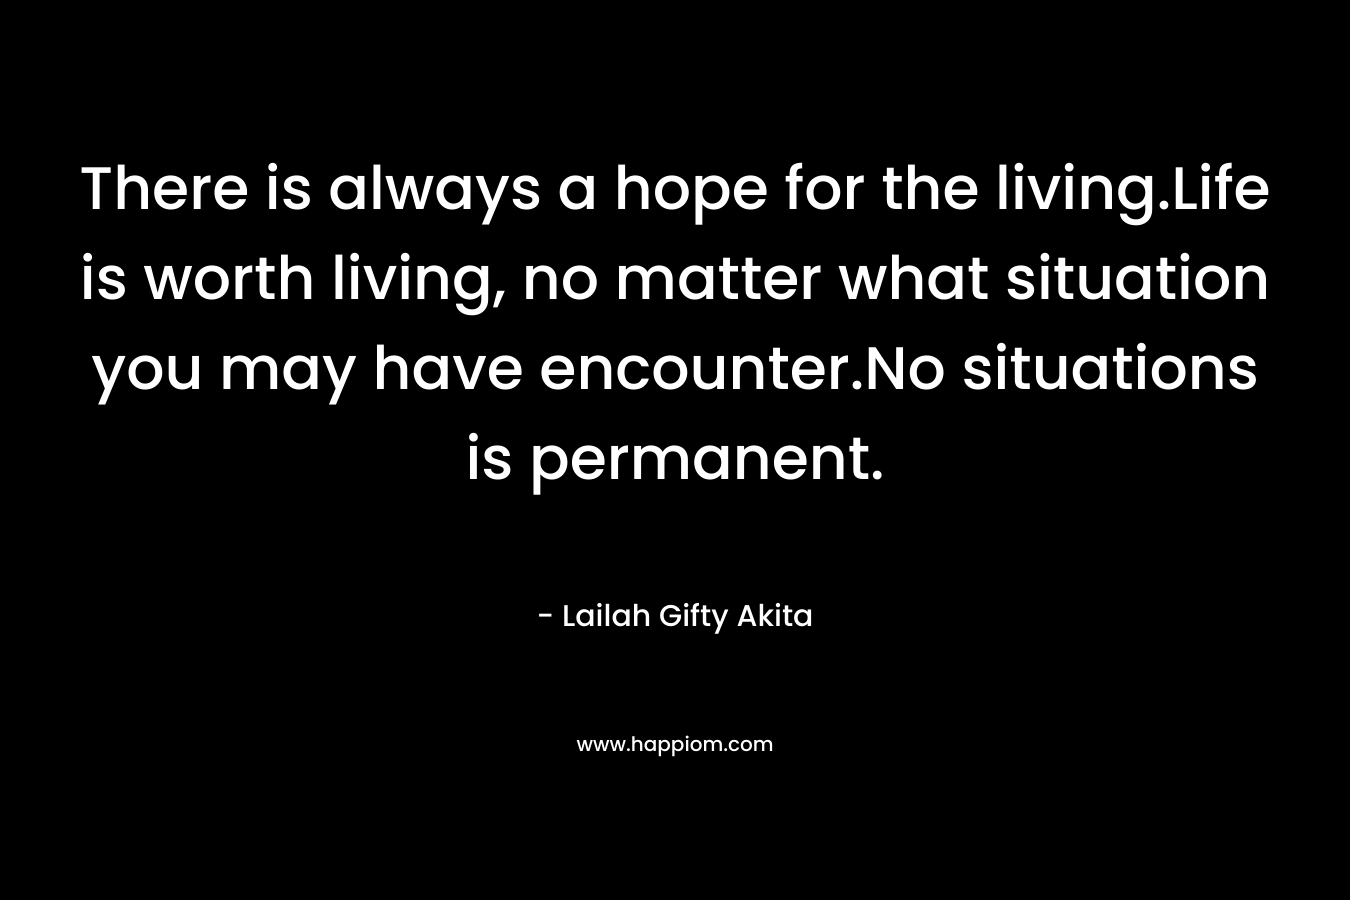 There is always a hope for the living.Life is worth living, no matter what situation you may have encounter.No situations is permanent.